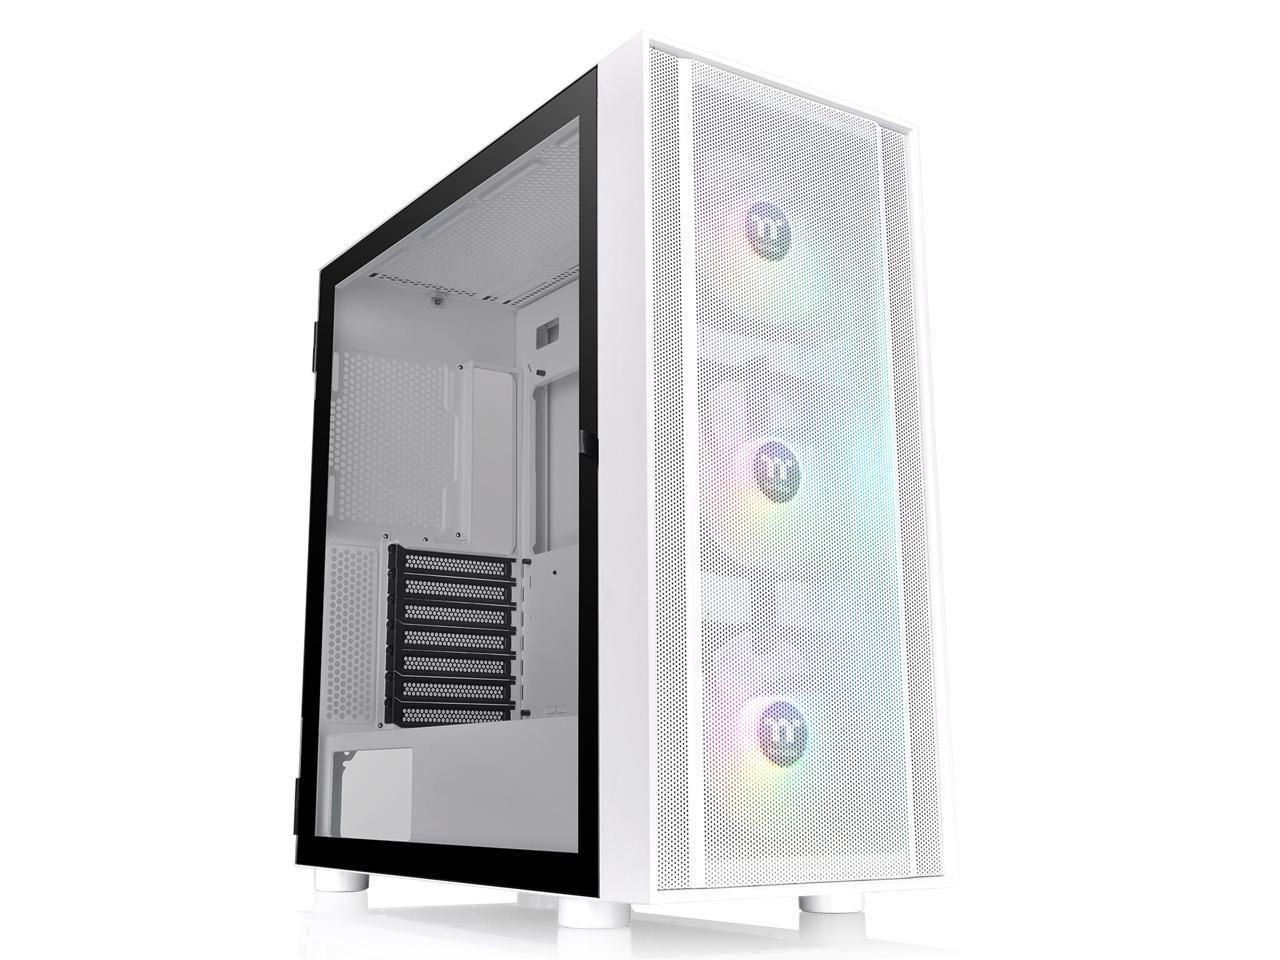 Thermaltake H570 TG Snow Edition Atx Mid Tower Argb Tempered Glass Computer Case Chassis With Mesh Front Panel Ca-1T9-00M6wn-01